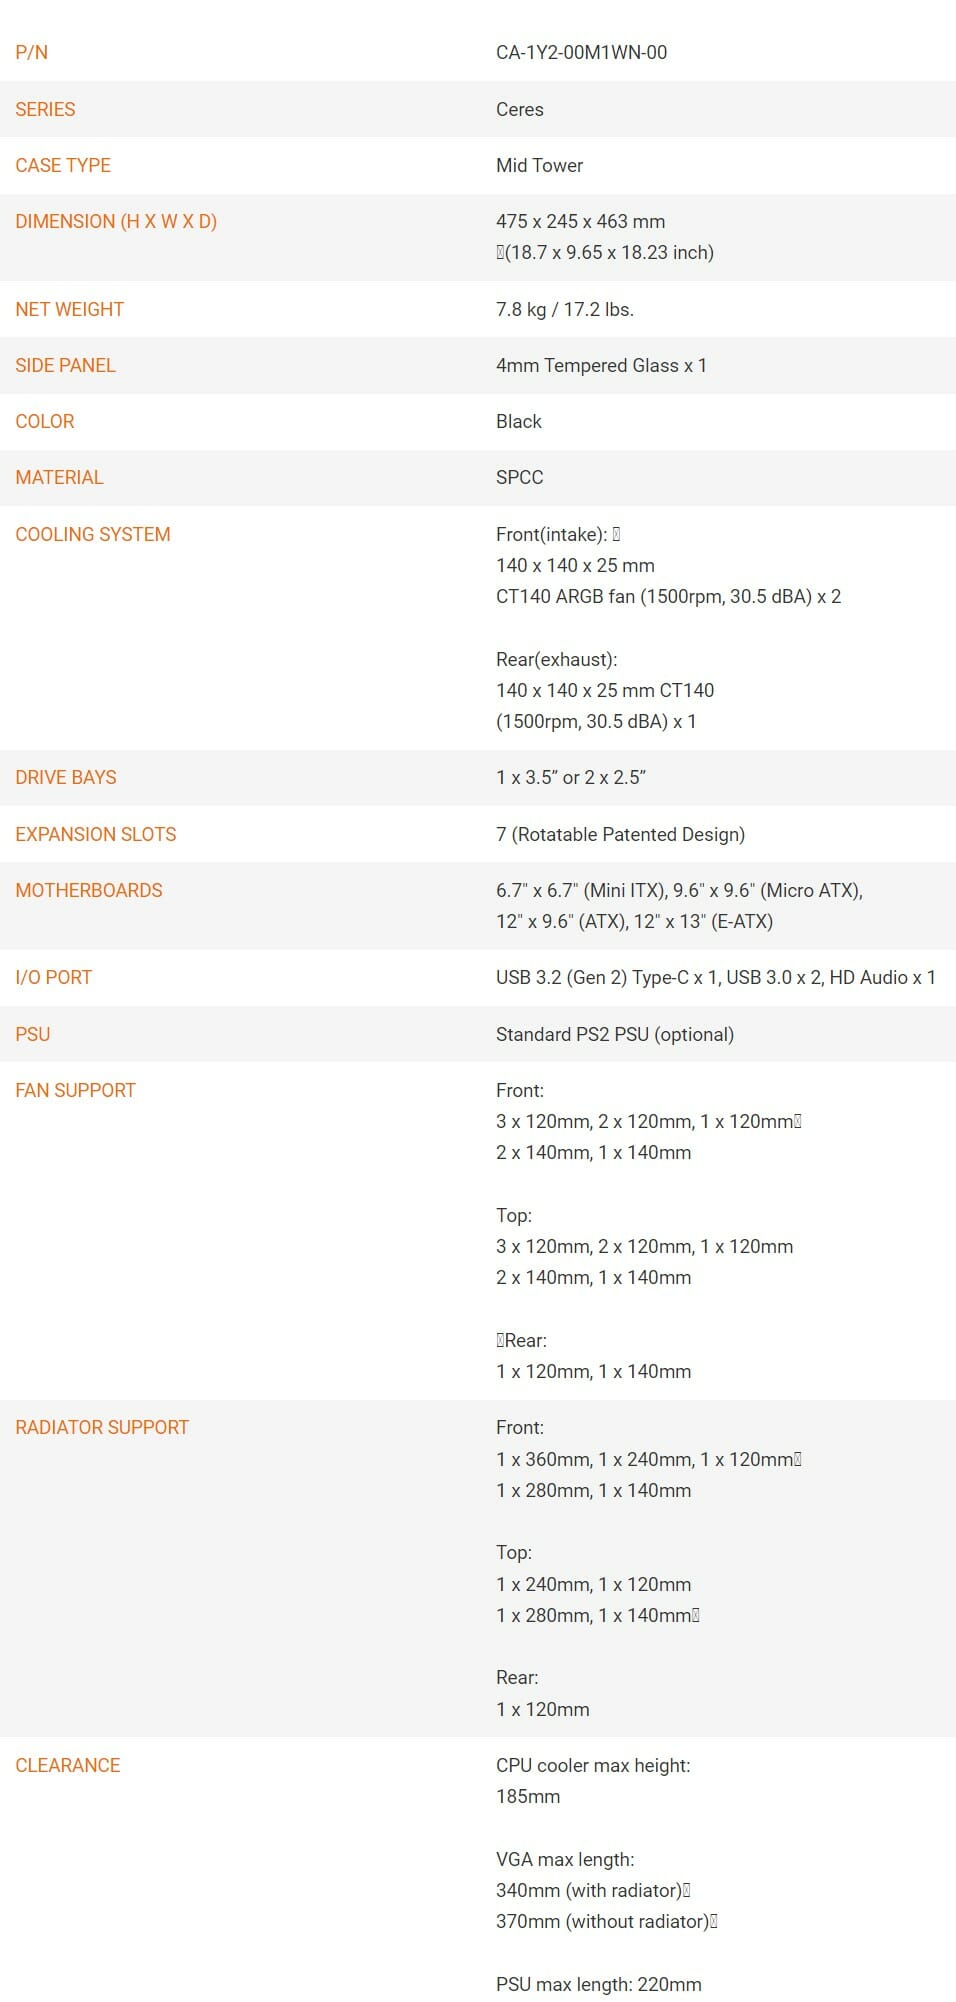 Thermaltake Ceres 300 TG ARGB PC Case specifications 